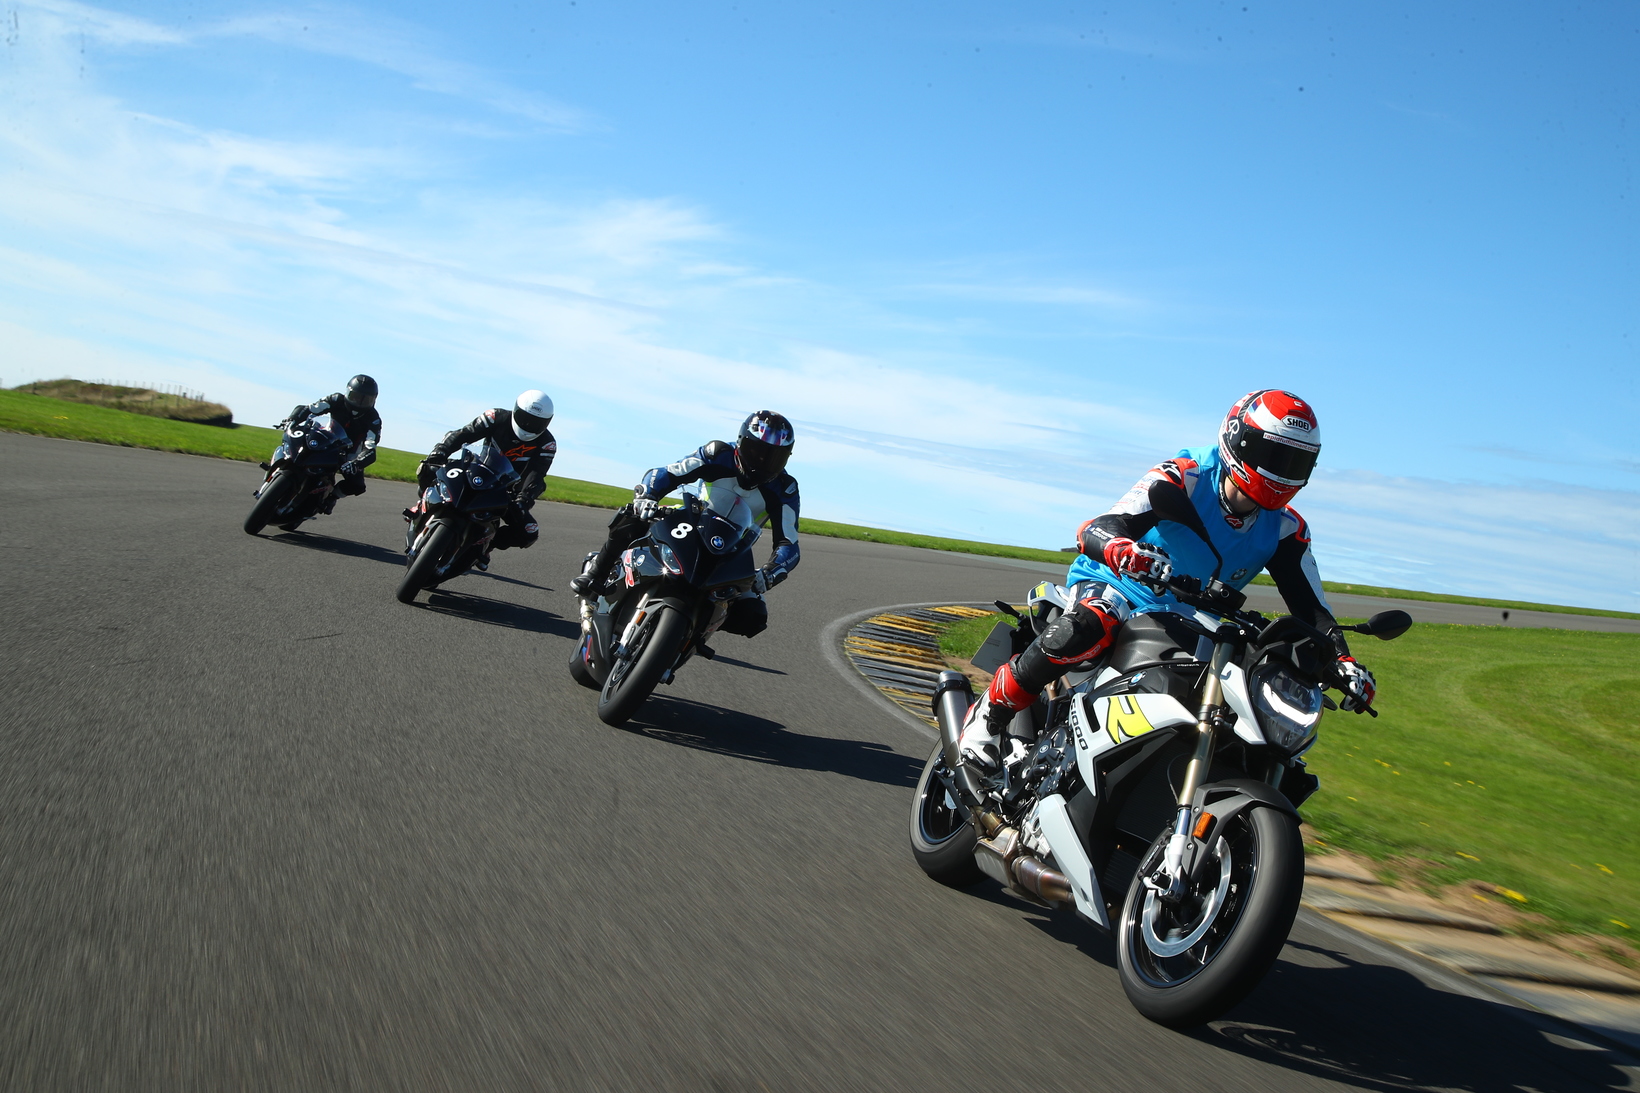 Riders at the BMW Performance Academy